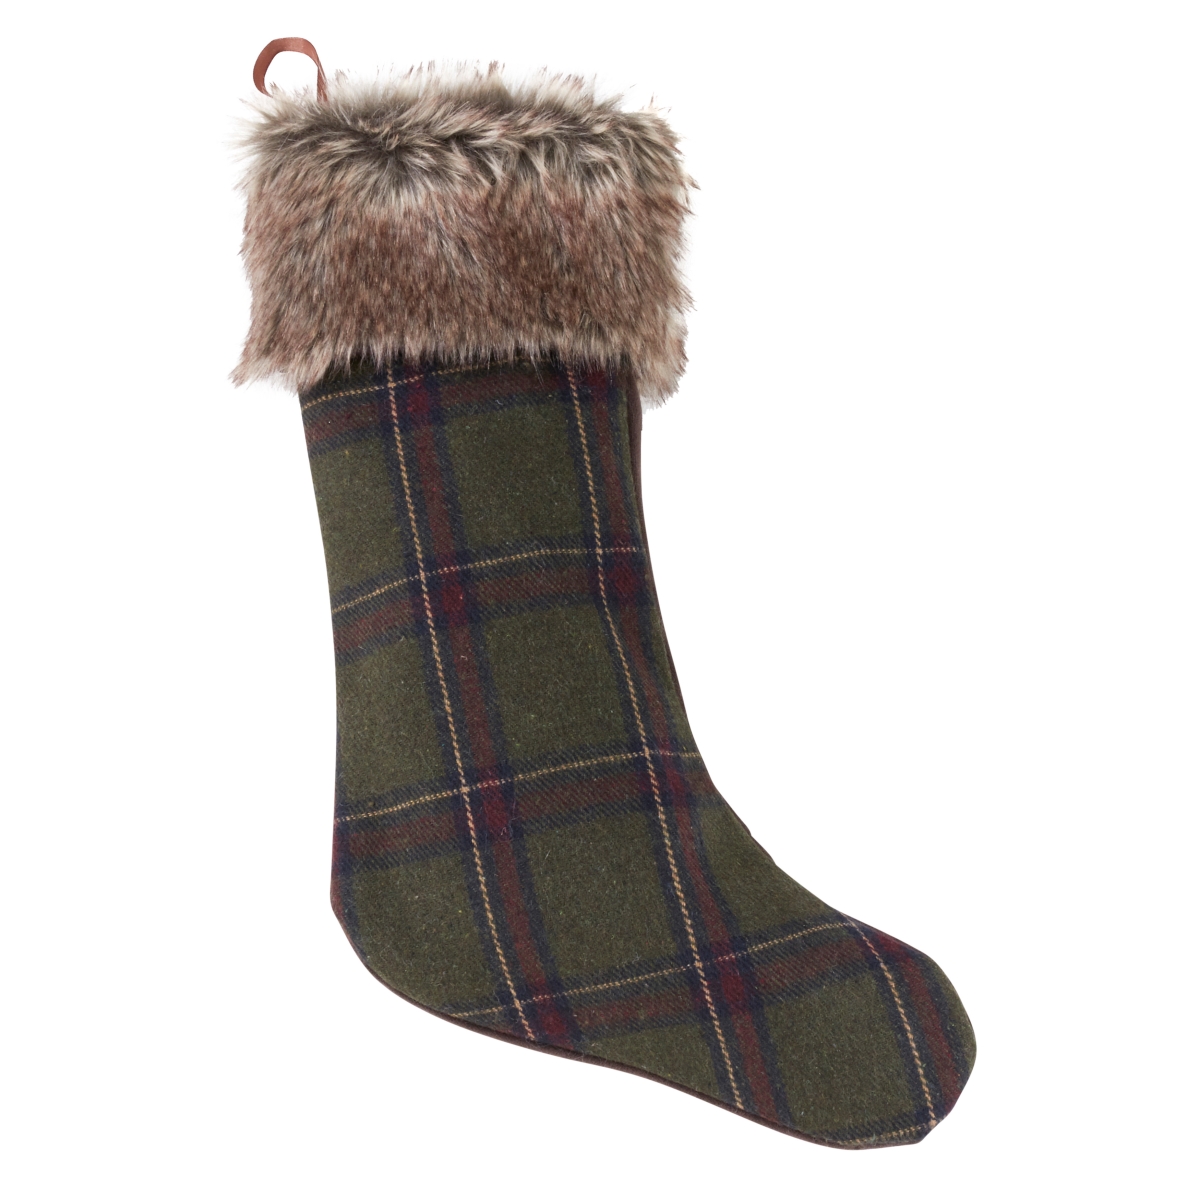 1890.g1915 19 X 15 In. Forester Christmas Stocking Faux Fur With Plaid Design - Green